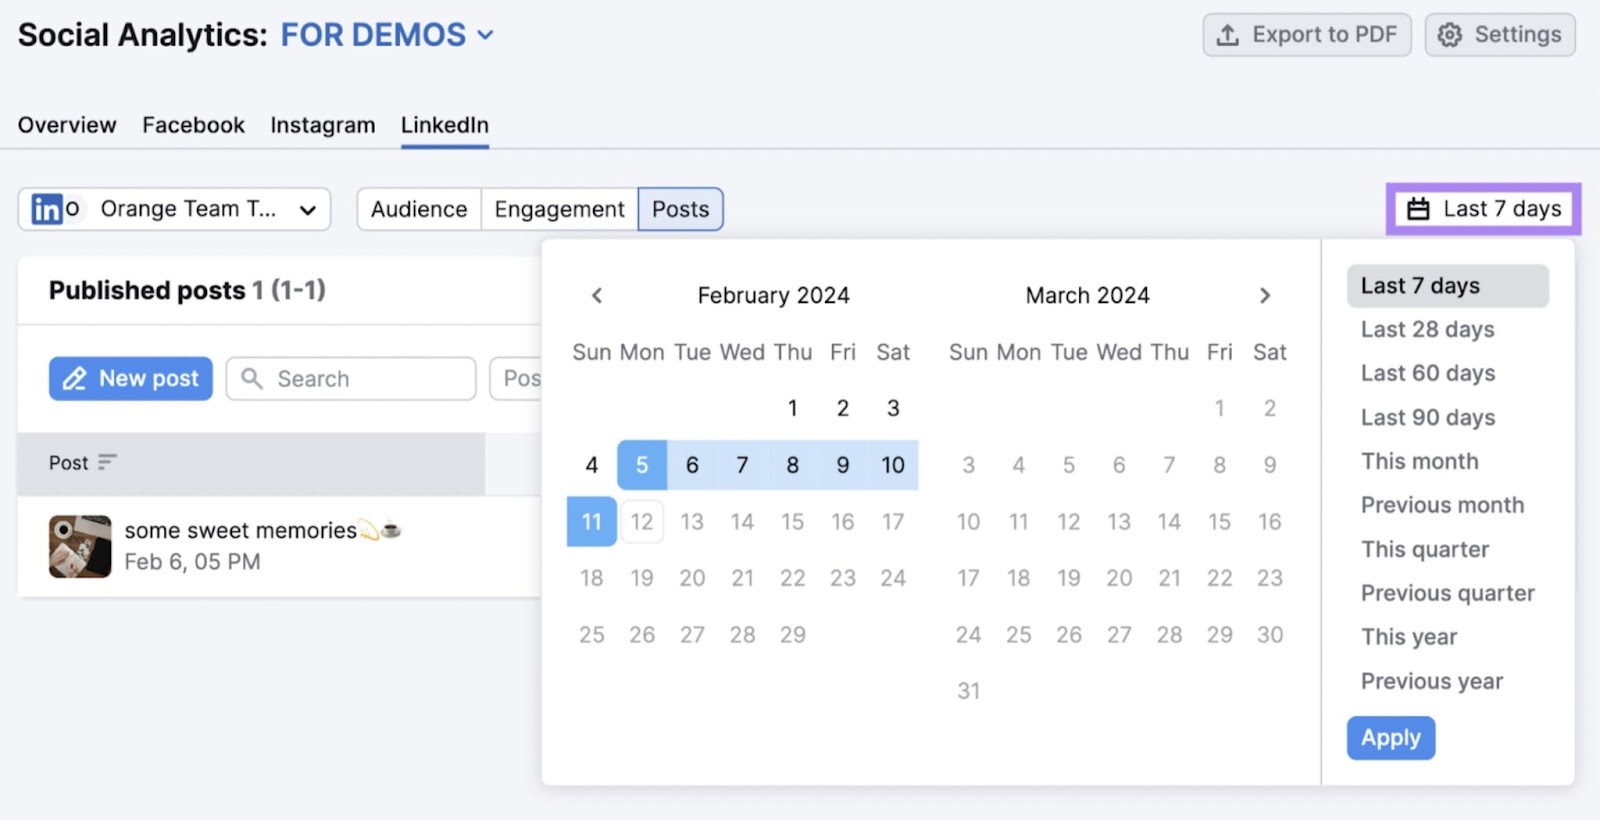 Semrush Social Analytics calendar interface with the last 7 days highlighted and displayed